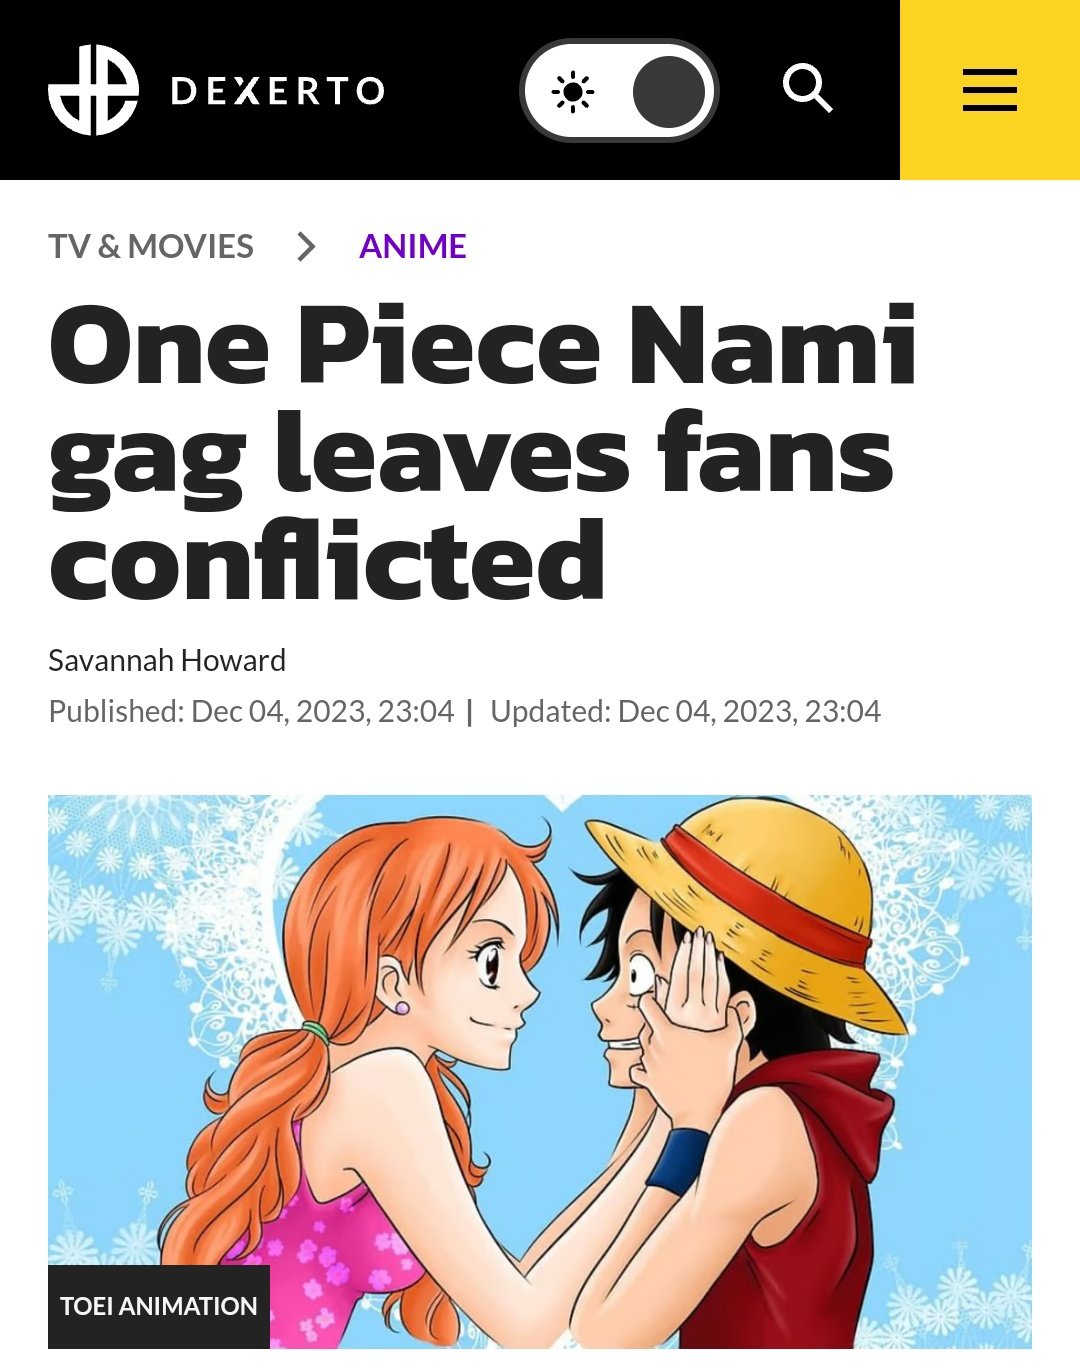 One Piece Nami gag leaves fans conflicted - Dexerto